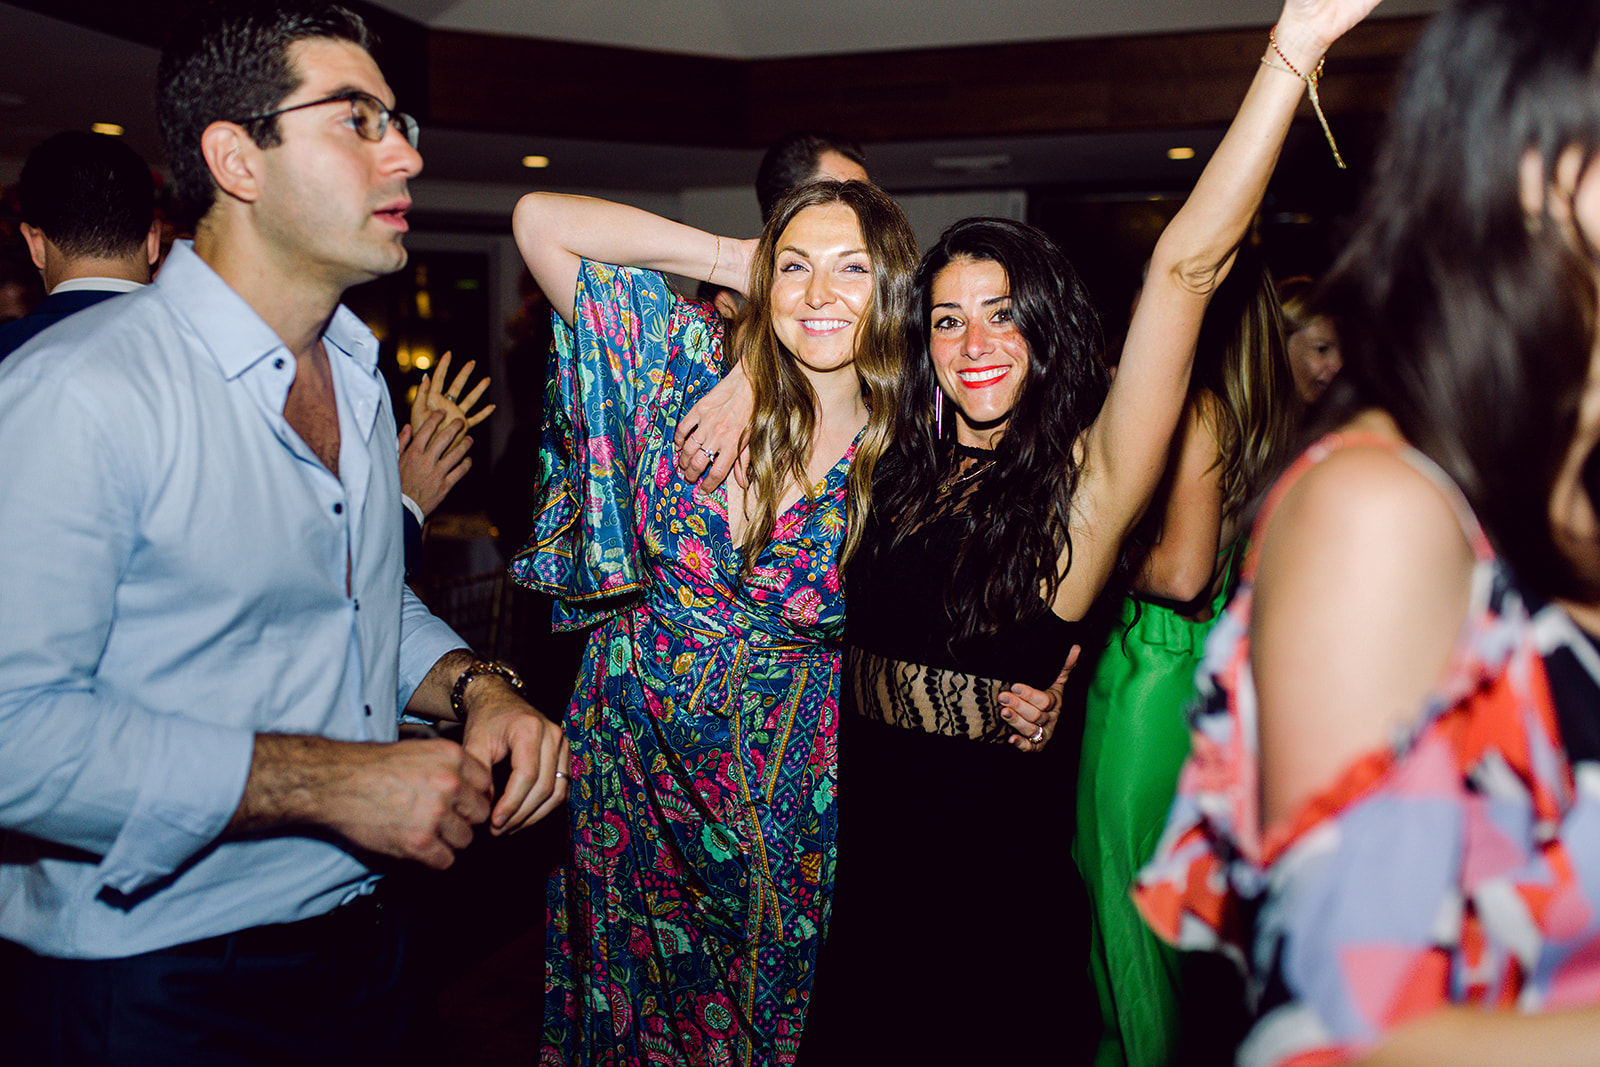 Guests stop dancing to posing on dance floor at wedding reception of Mayfair House Hotel & Garden, Miami.